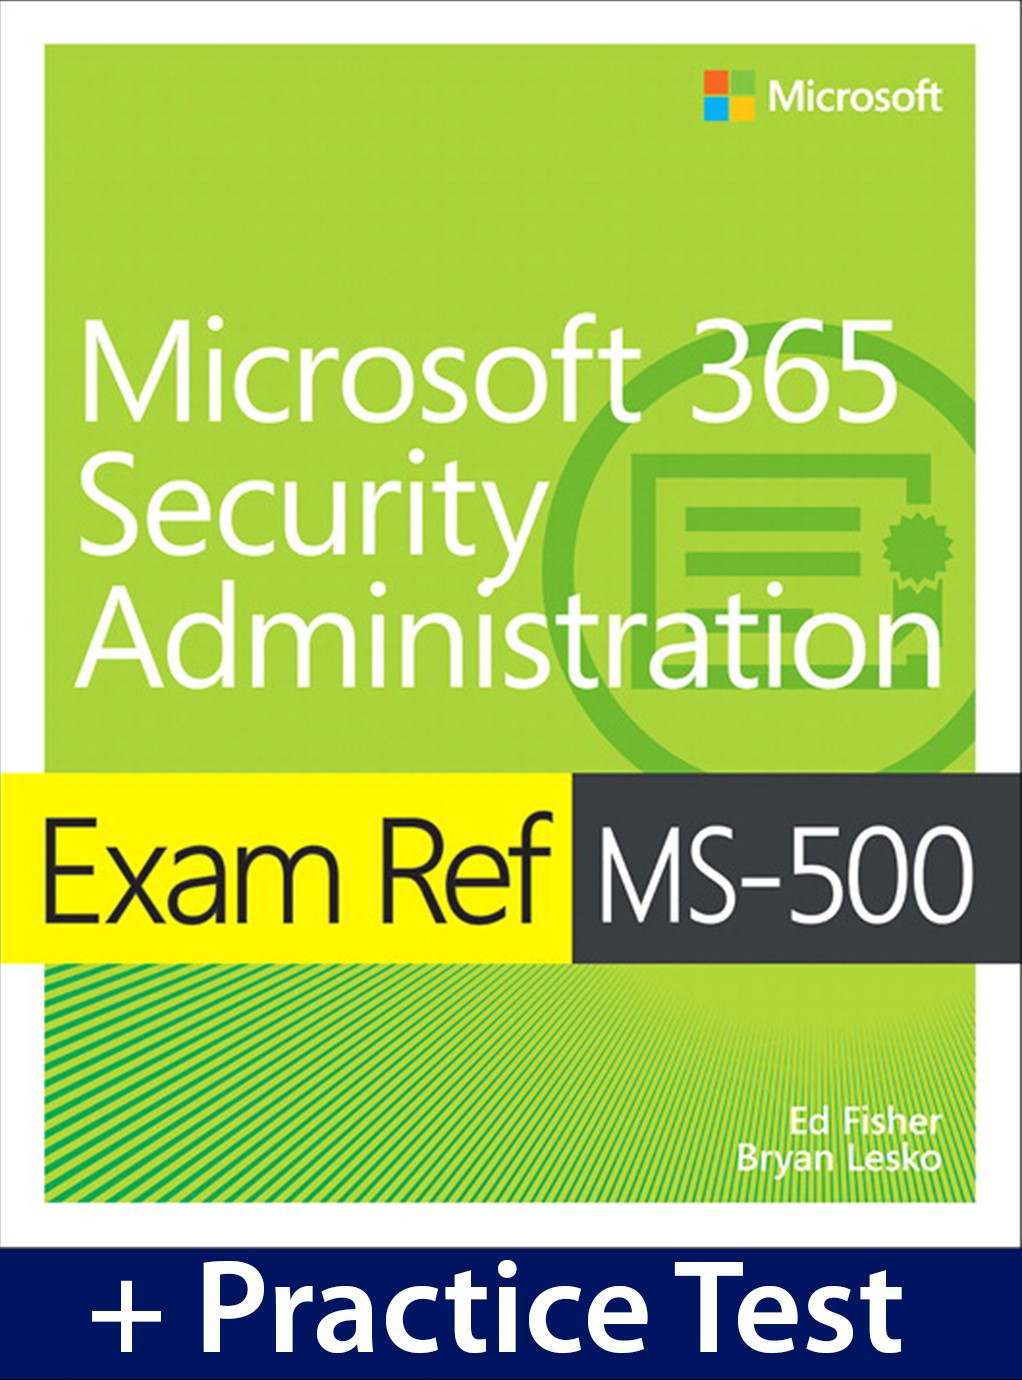 Exam Ref MS-500 Microsoft 365 Security Administration with Practice Test